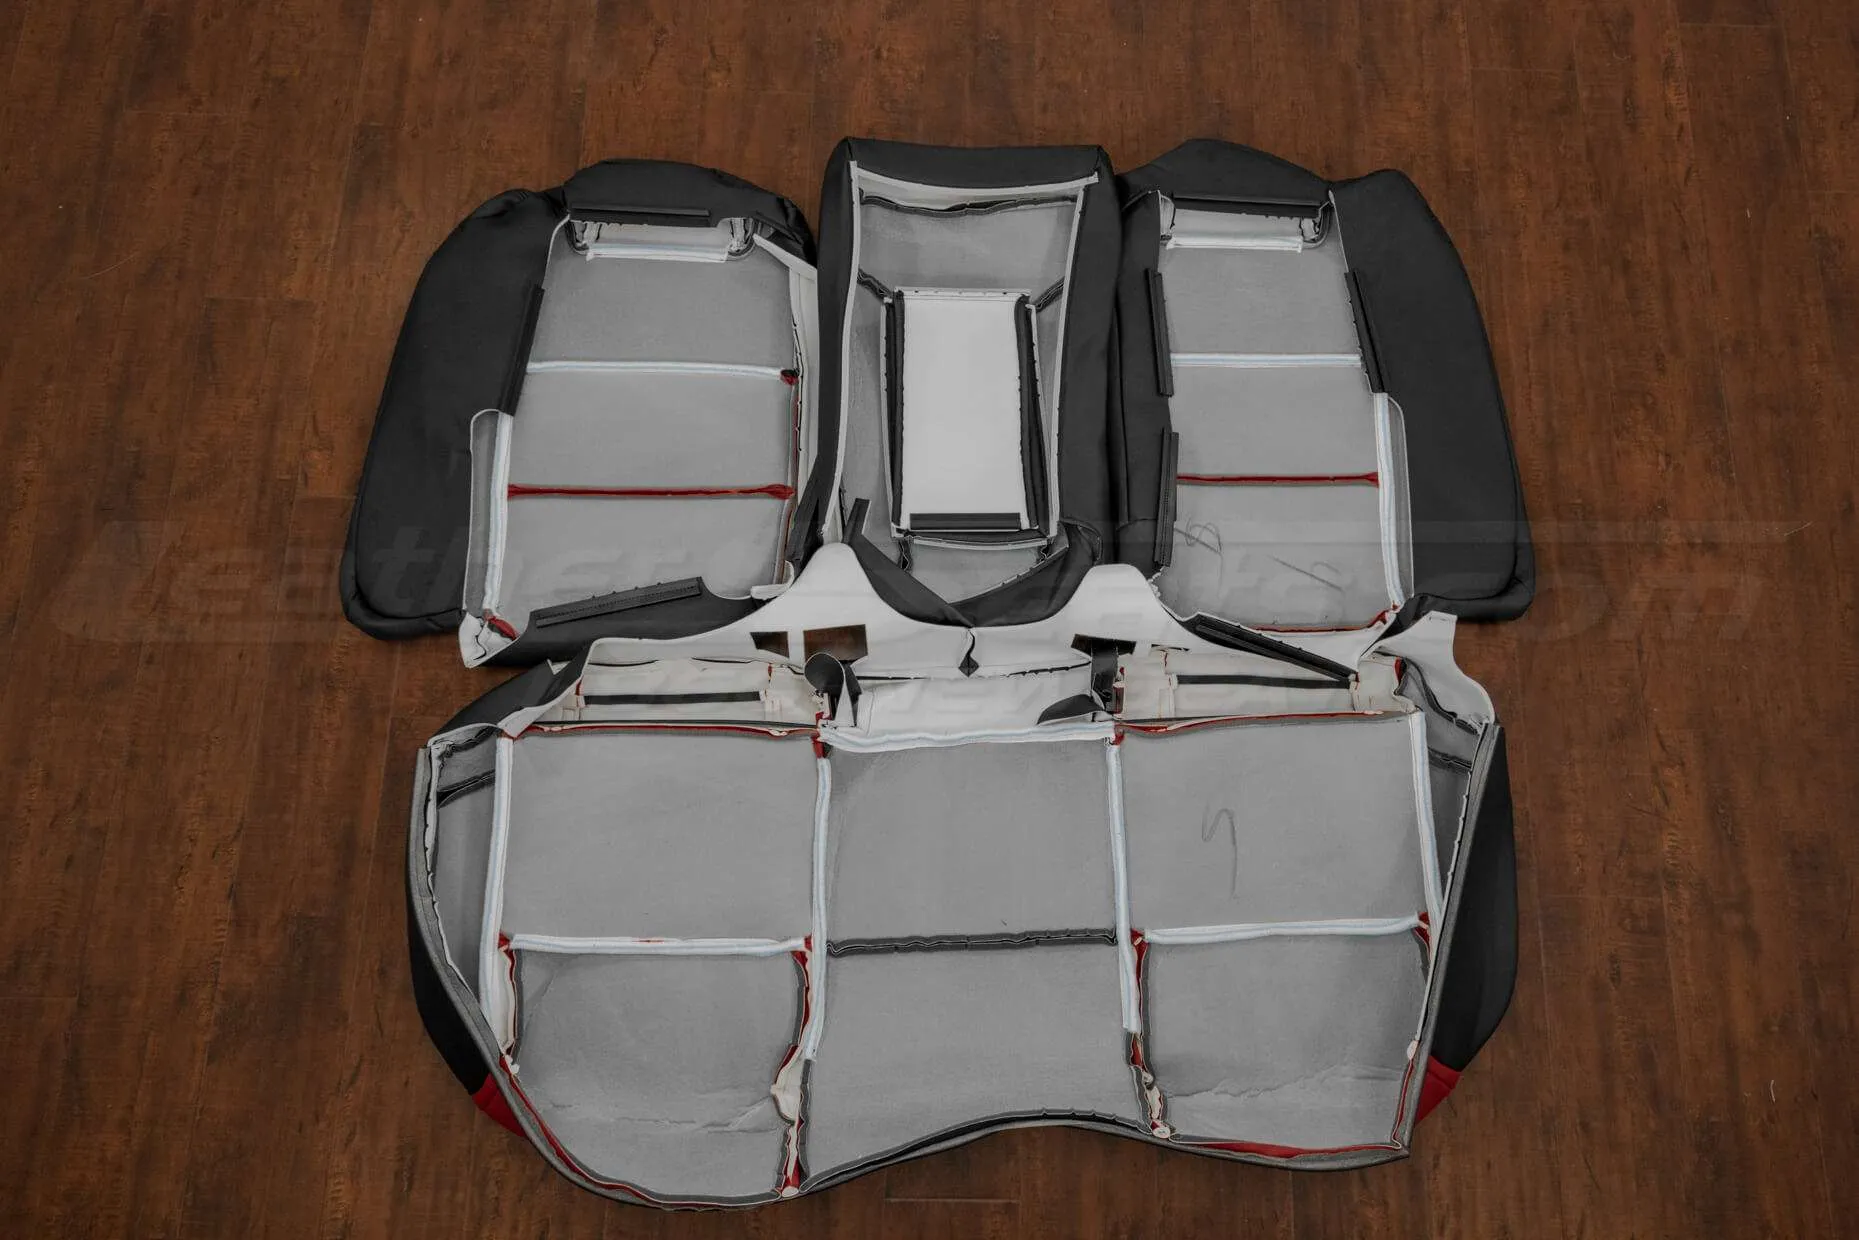 Pontiac G8 Leather Kit - Black & Red - Back view of rear seats